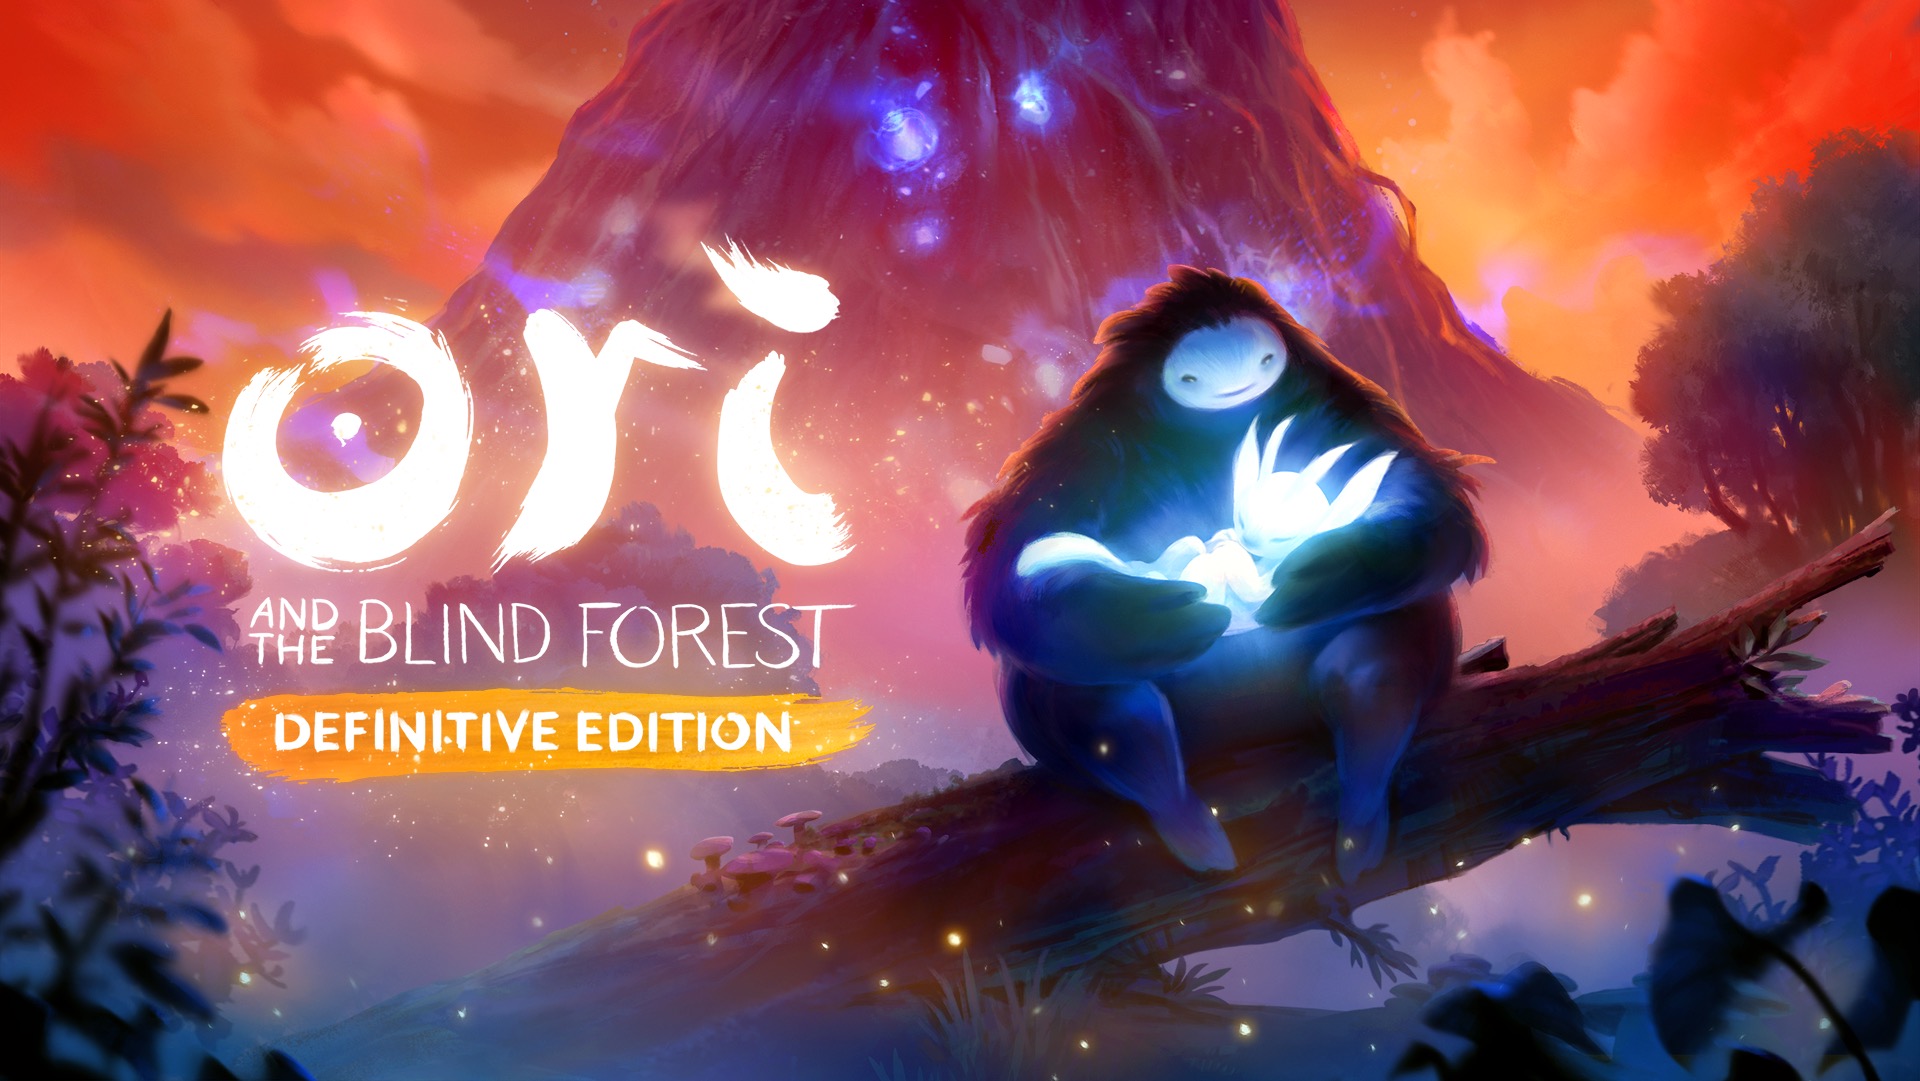 imagen del juego ori and the blind forest